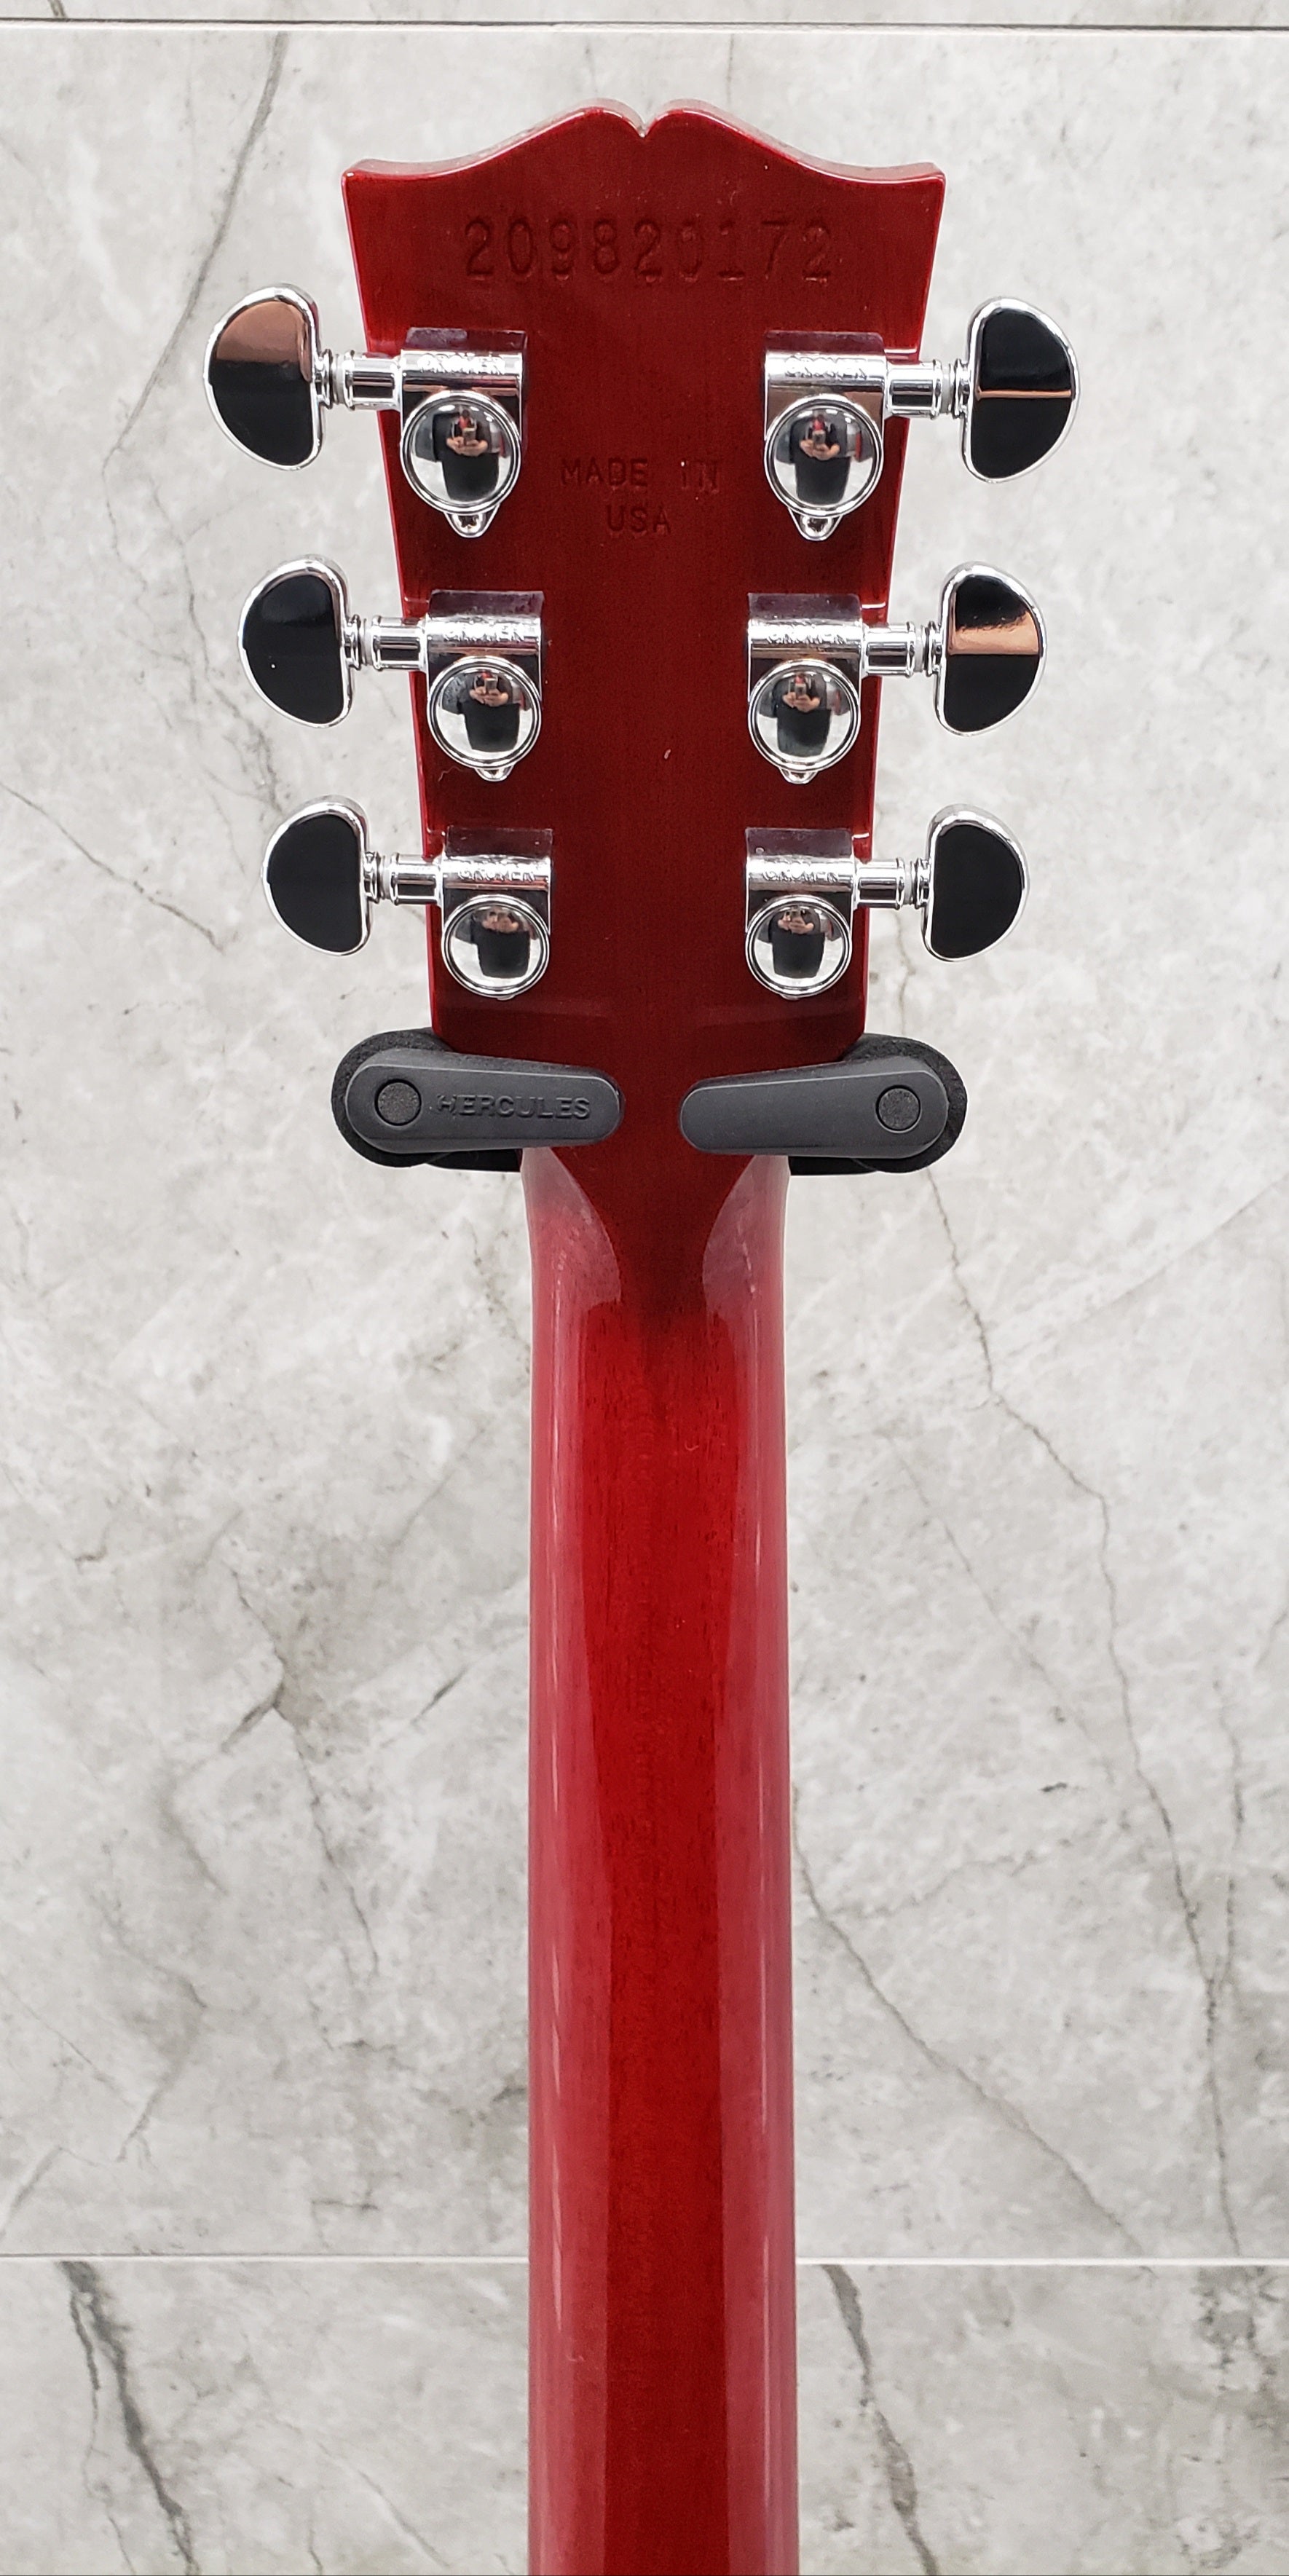 Gibson SG Standard Left Hand - Heritage Cherry SGS00HCCHLH SERIAL NUMBER 209820172 - 7.4 LBS